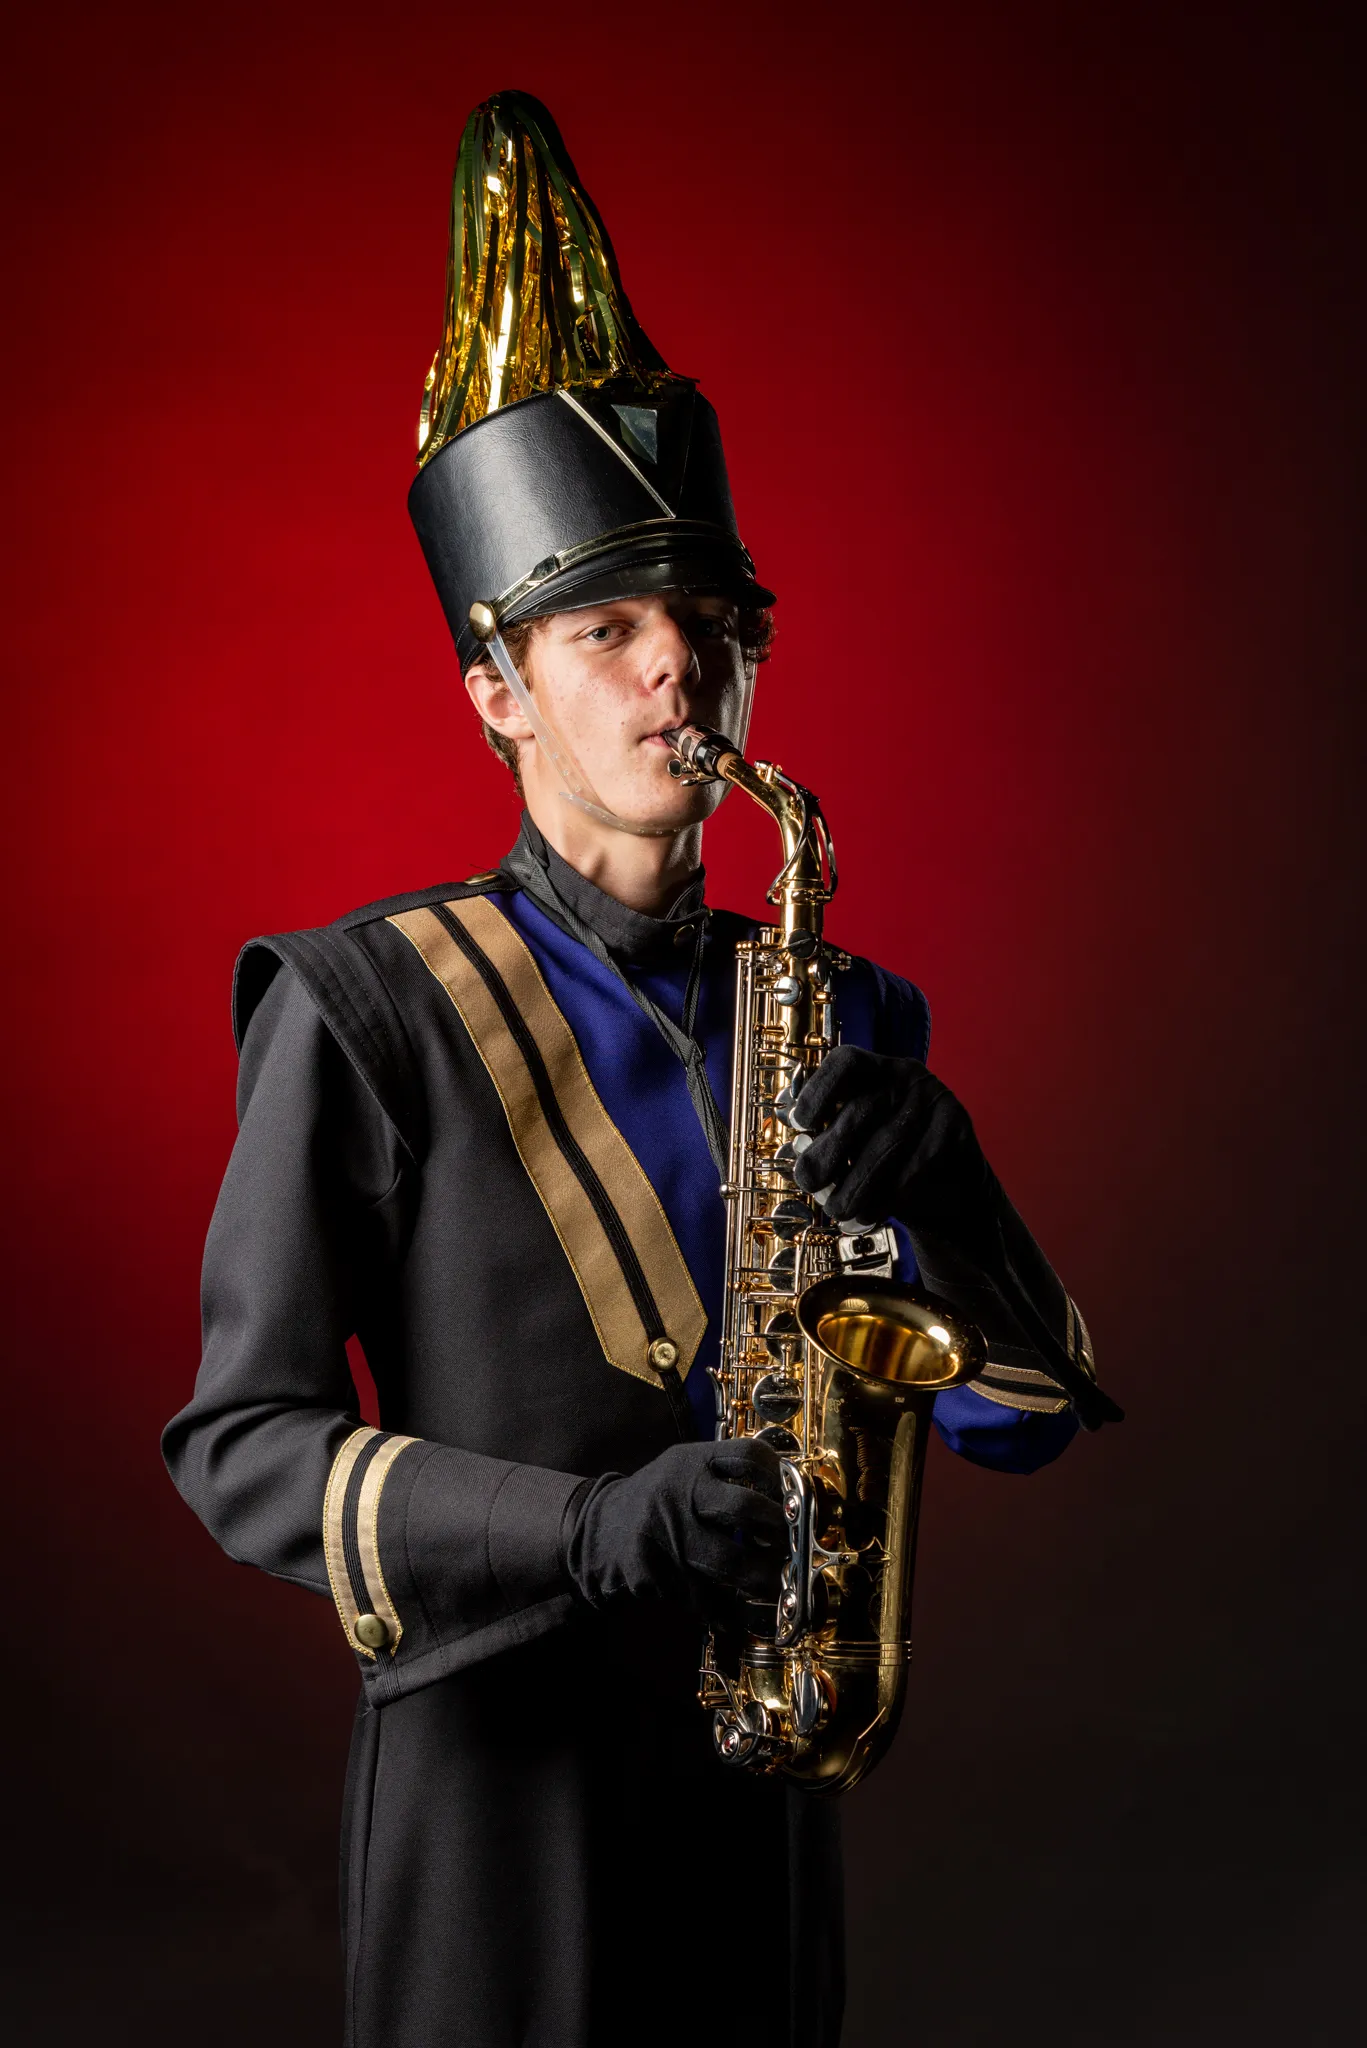 marching band member playing brass instrument